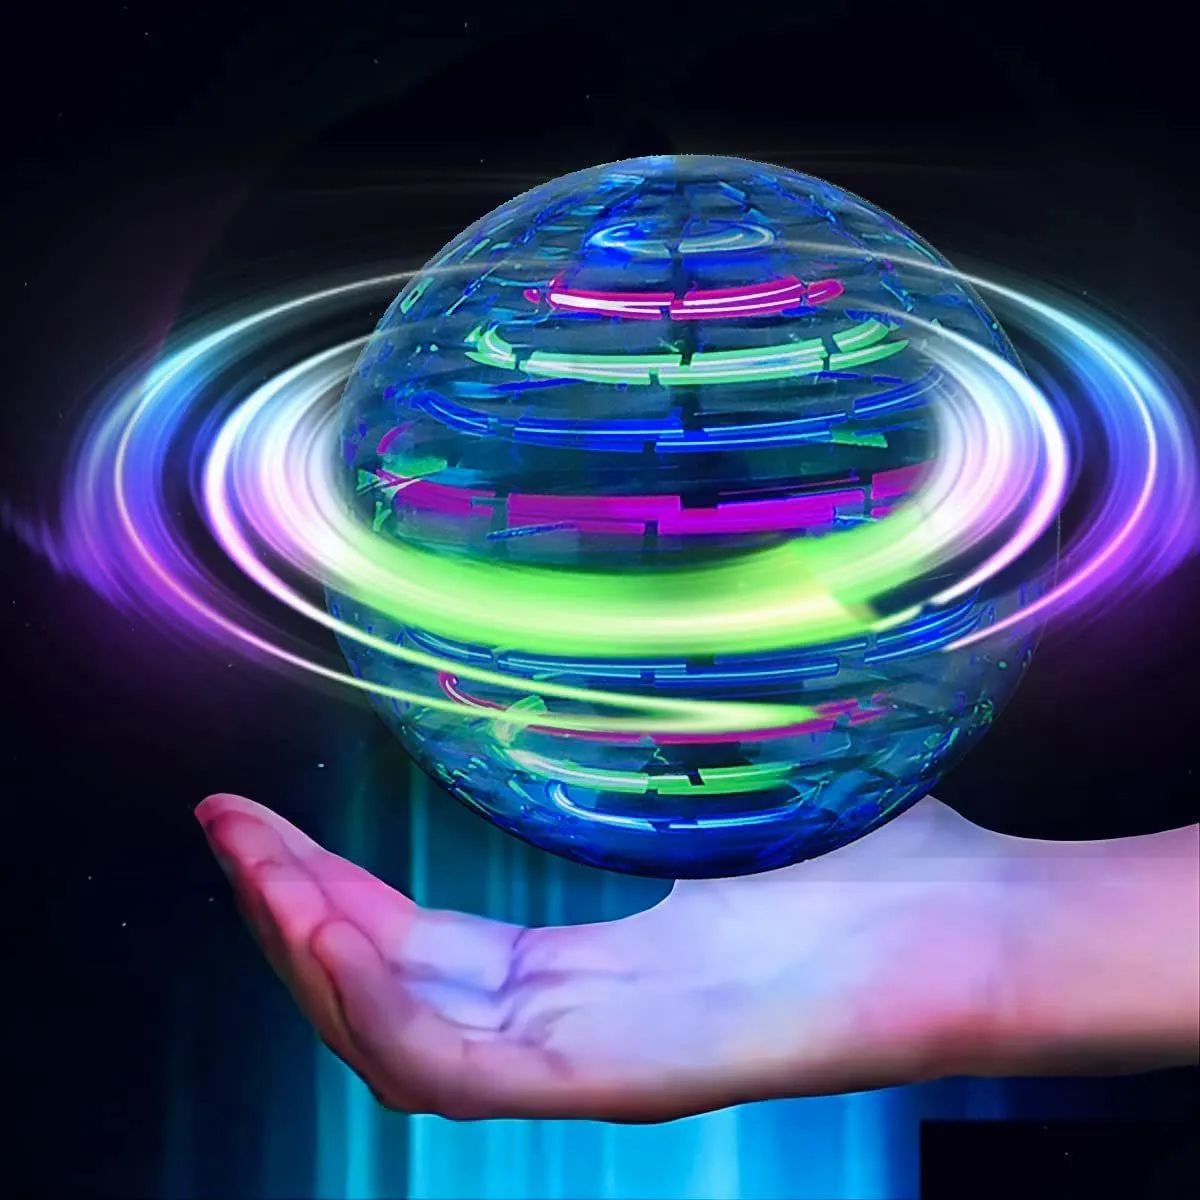 magic balls flying ball toy mini drone globe 360° rotating builtin rgb light hover spinner space orb for kids adts indoor outdoor dr